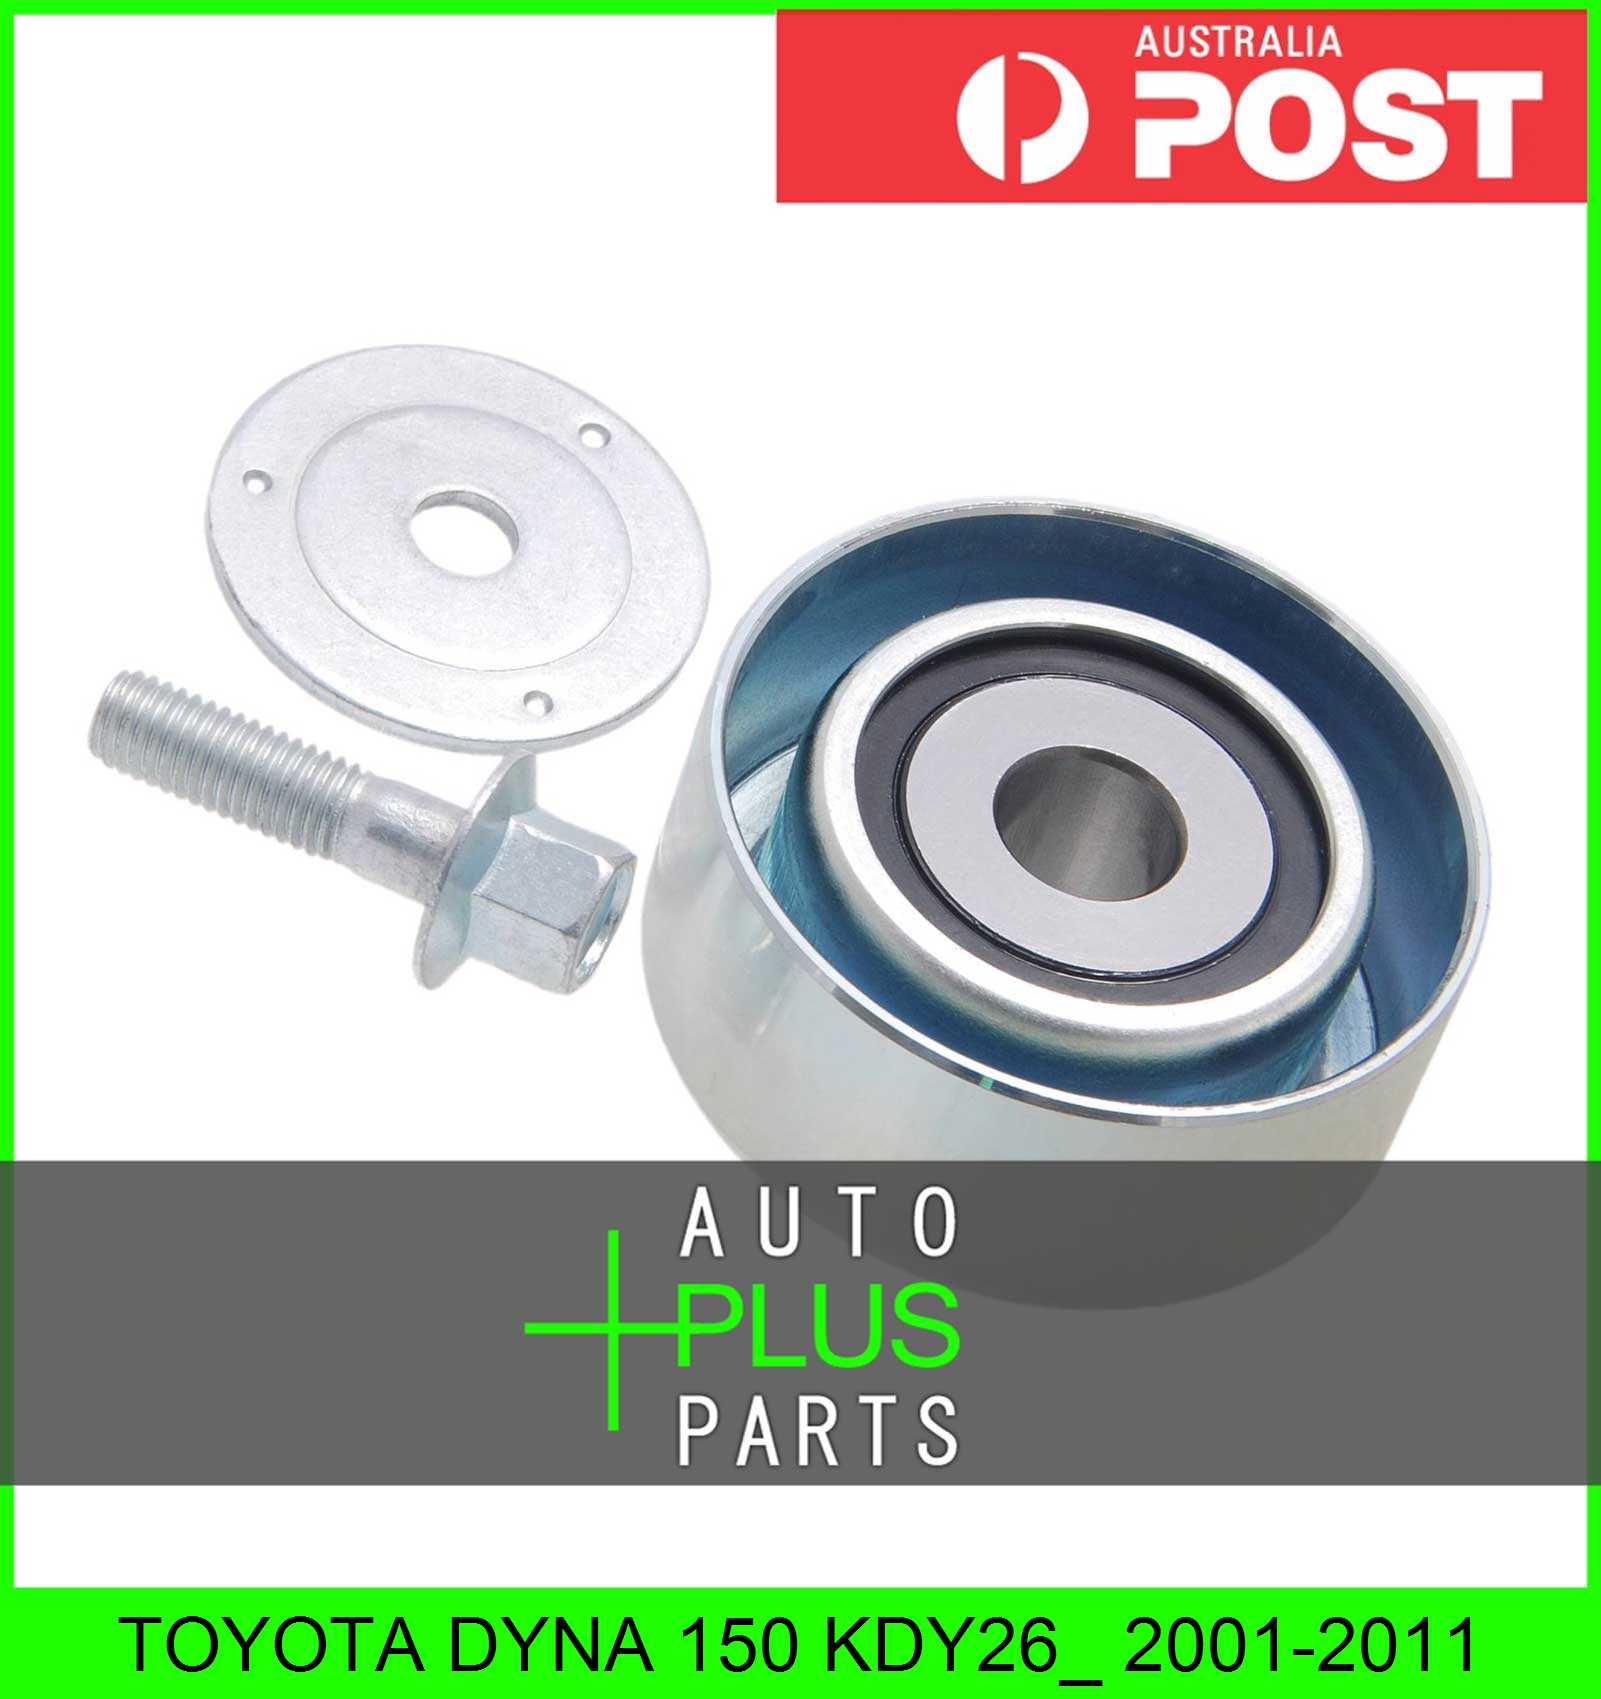 Fits TOYOTA DYNA 150 KDY26_ Engine Belt Pulley Idler Bearing Product Photo